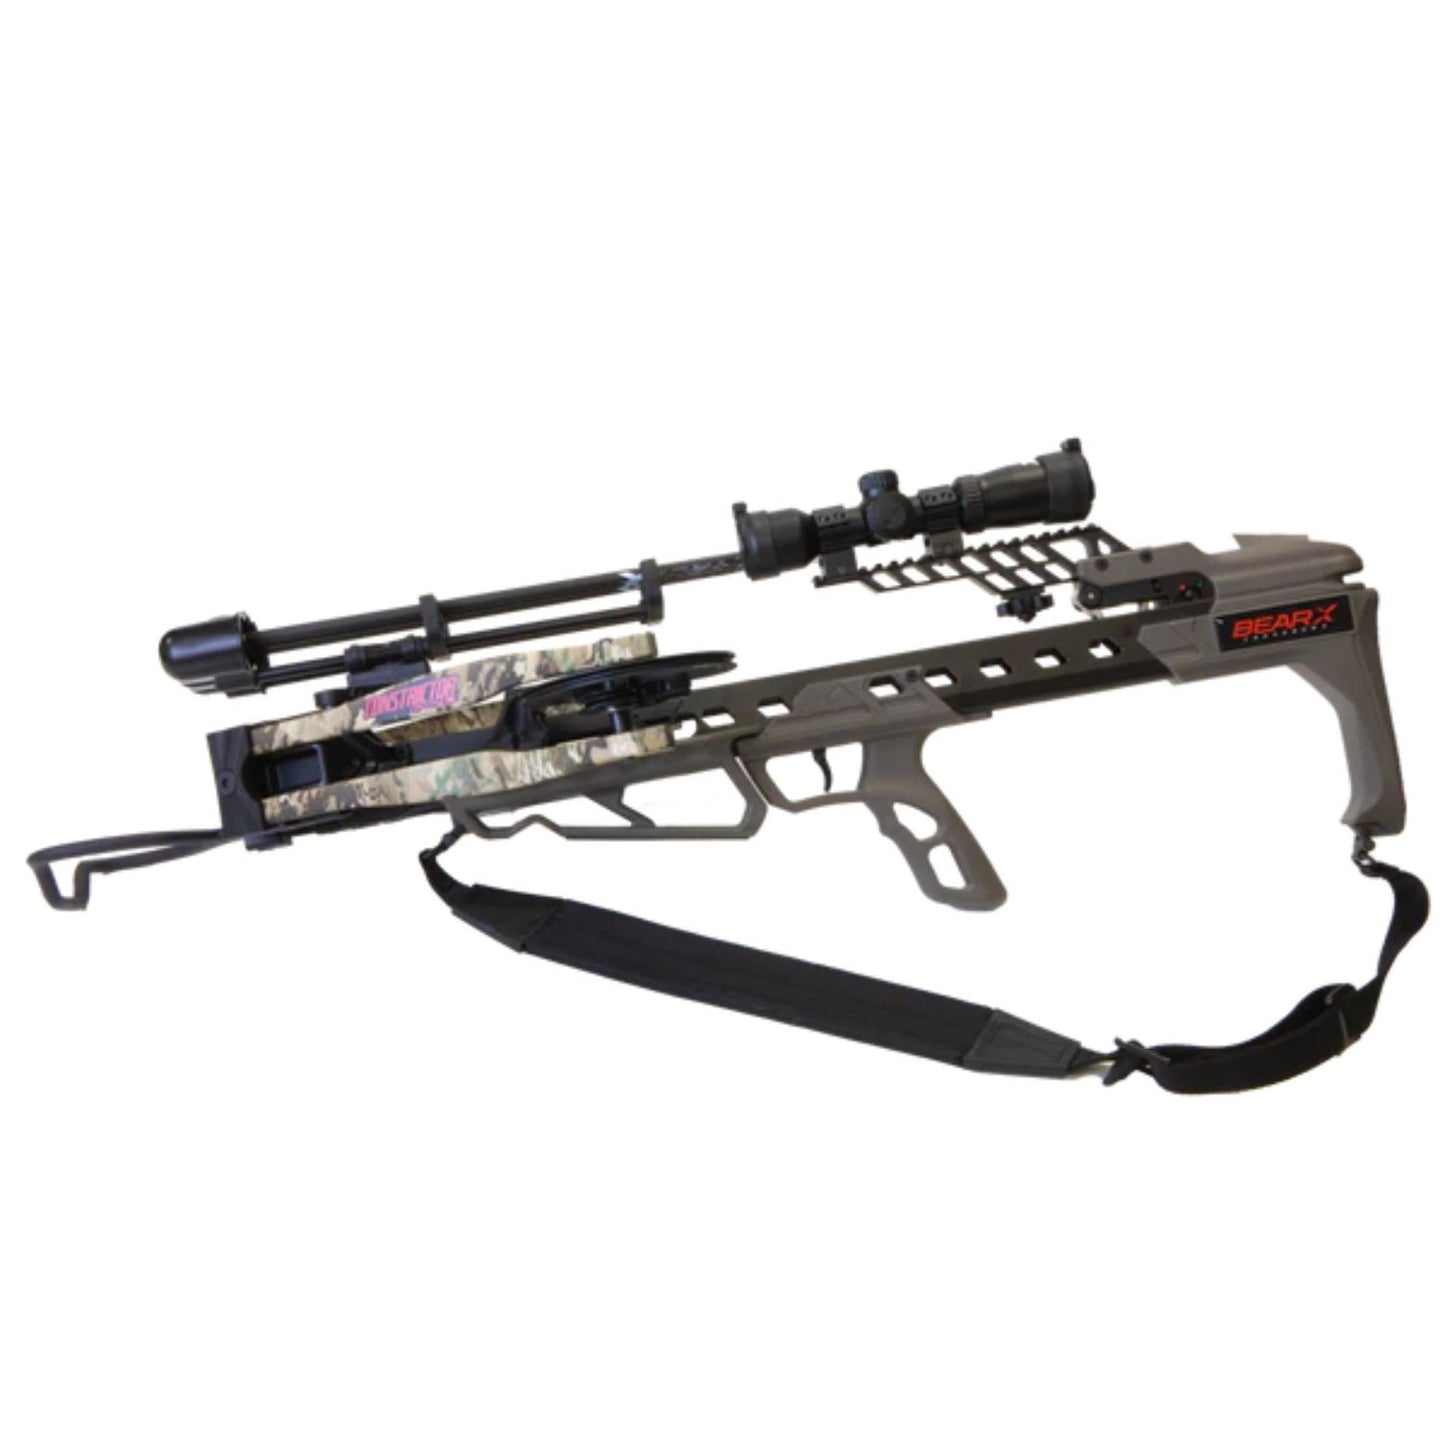 Bear X Constrictor Pro Crossbow Package